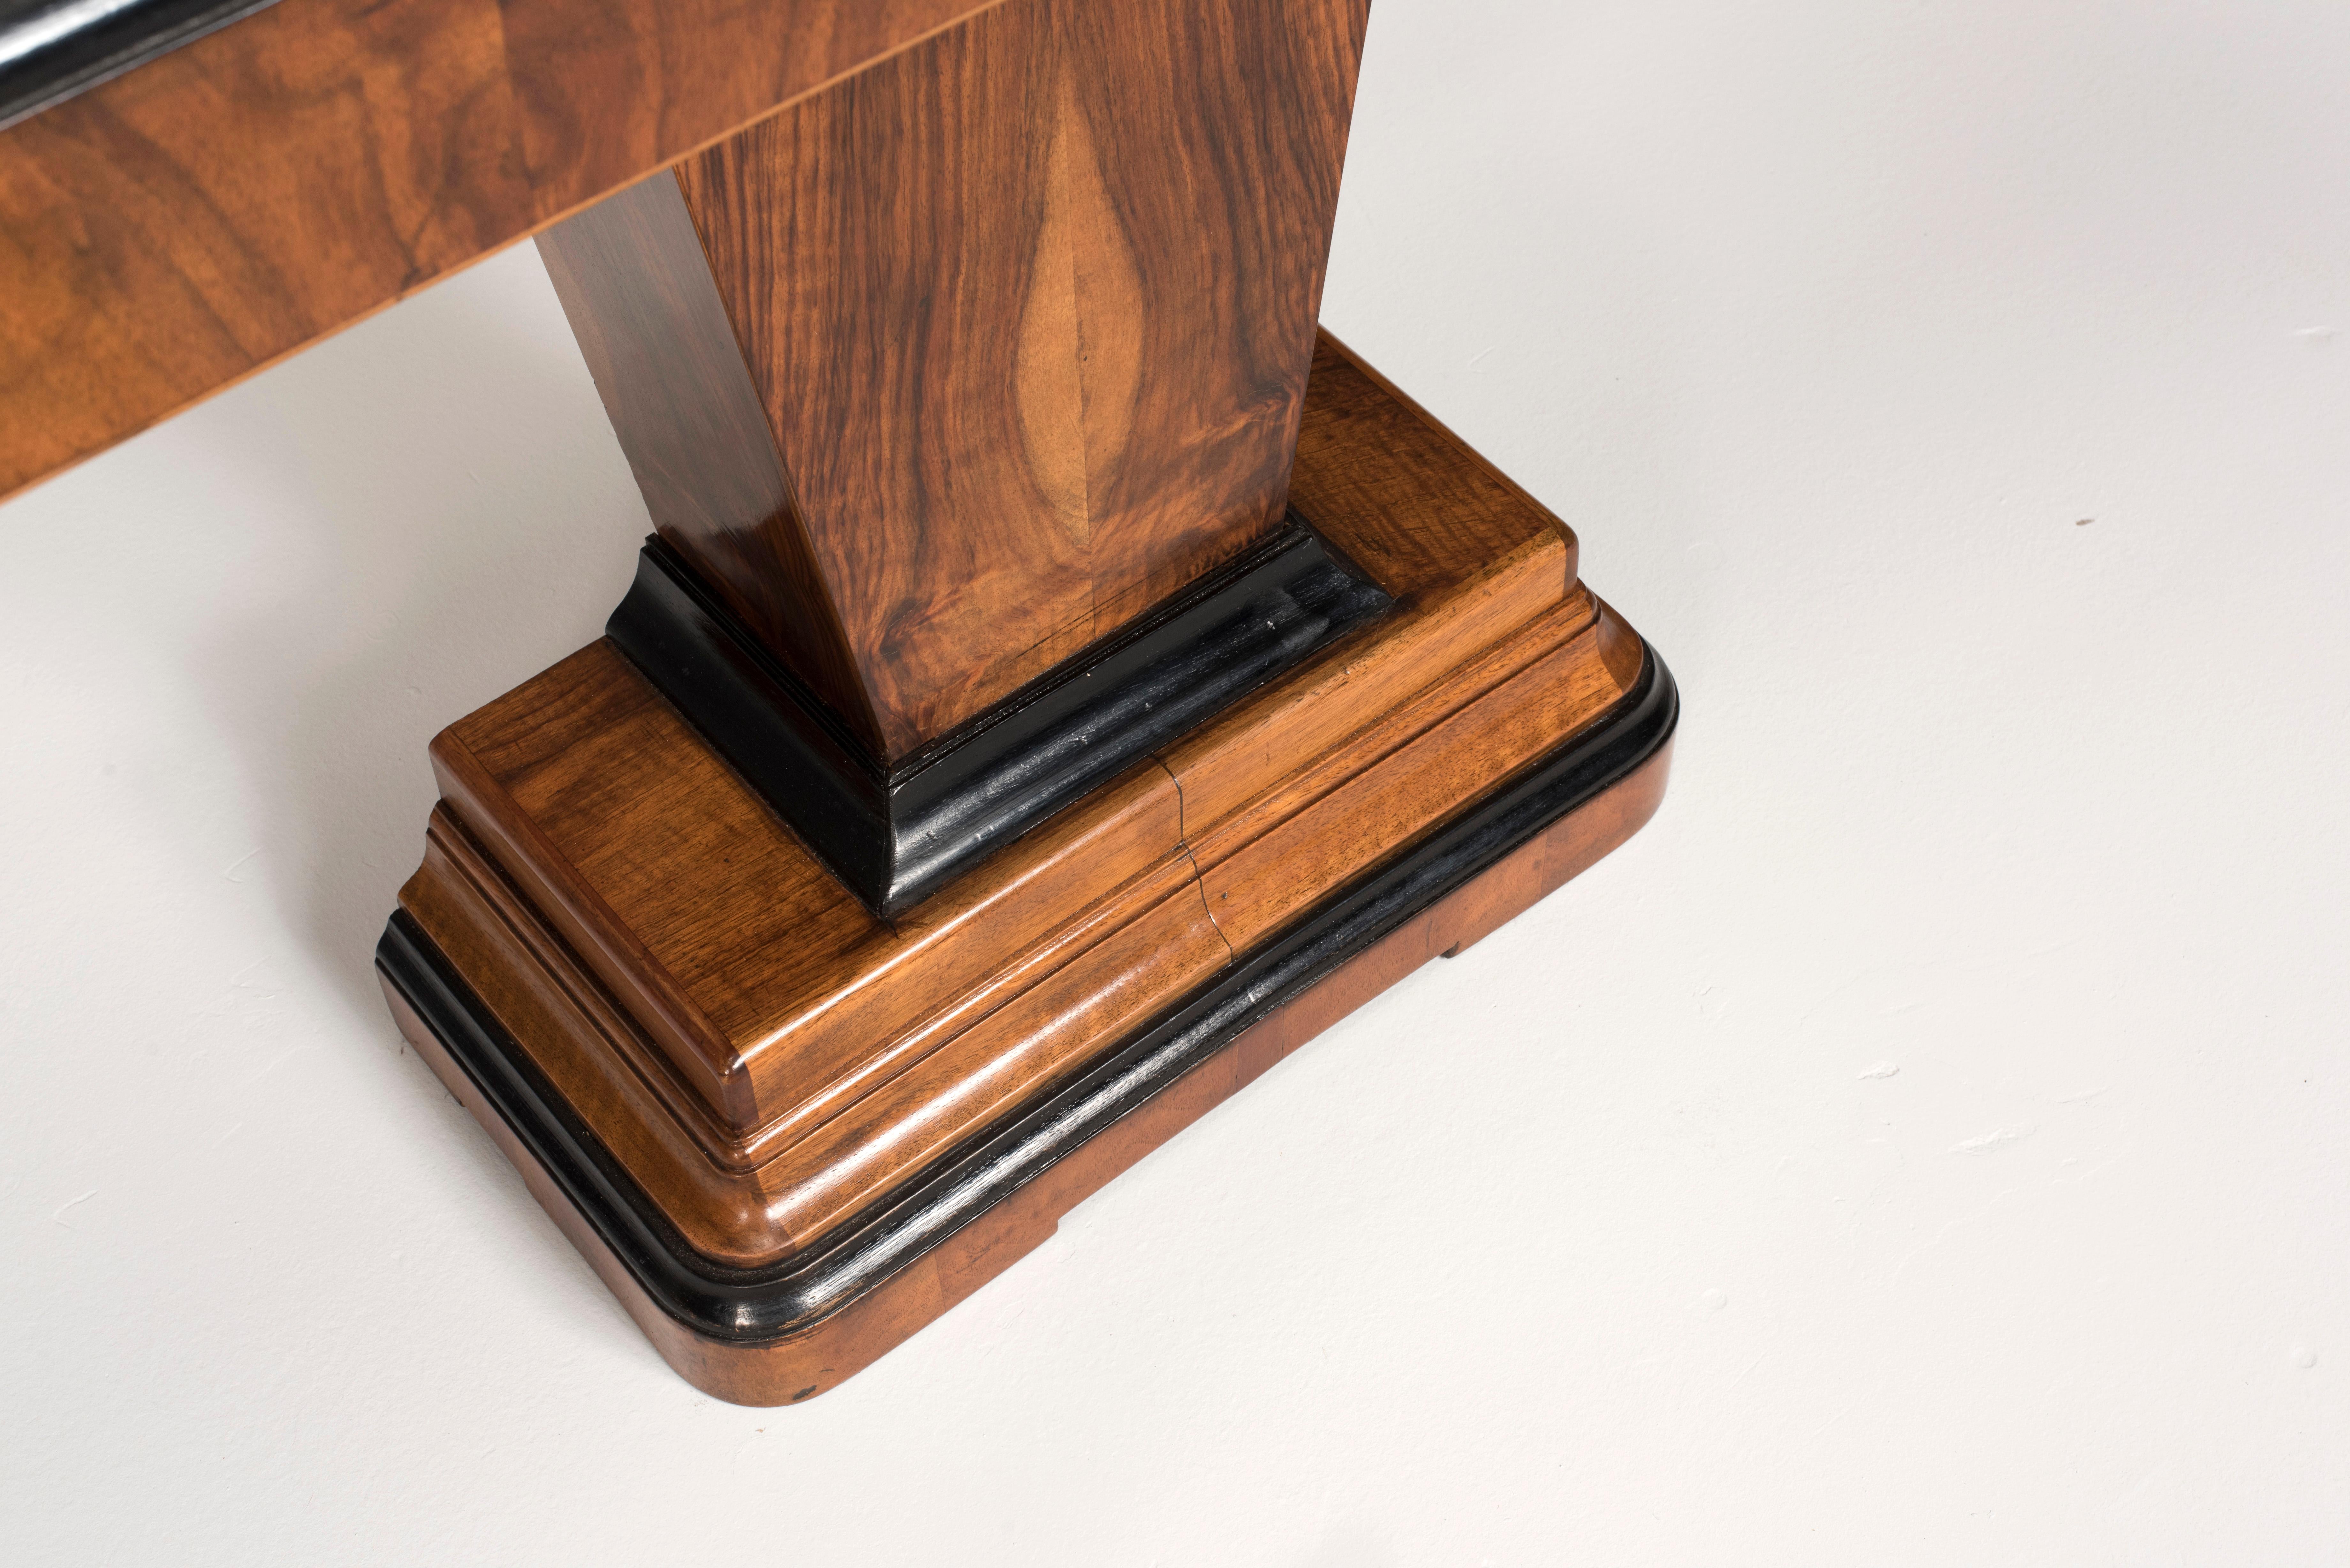 20th Century Art Deco Walnut Wood and Black Ebonized Lacquered Details Table Console